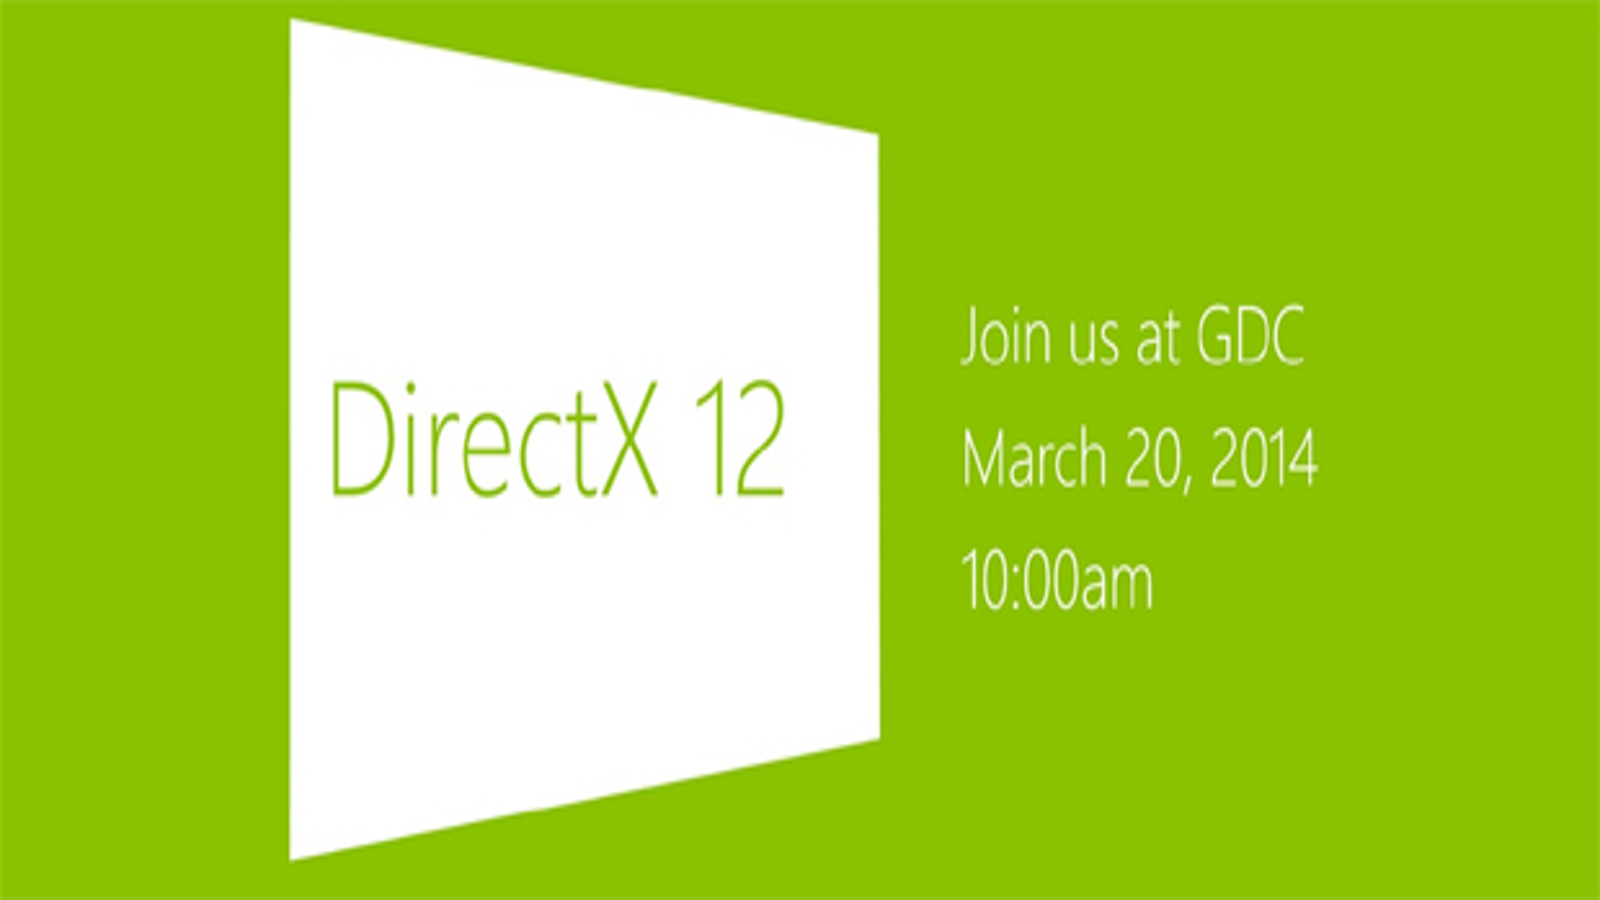 Microsoft Unveils DirectX 12 Ultimate: The GPU Feature Set For the